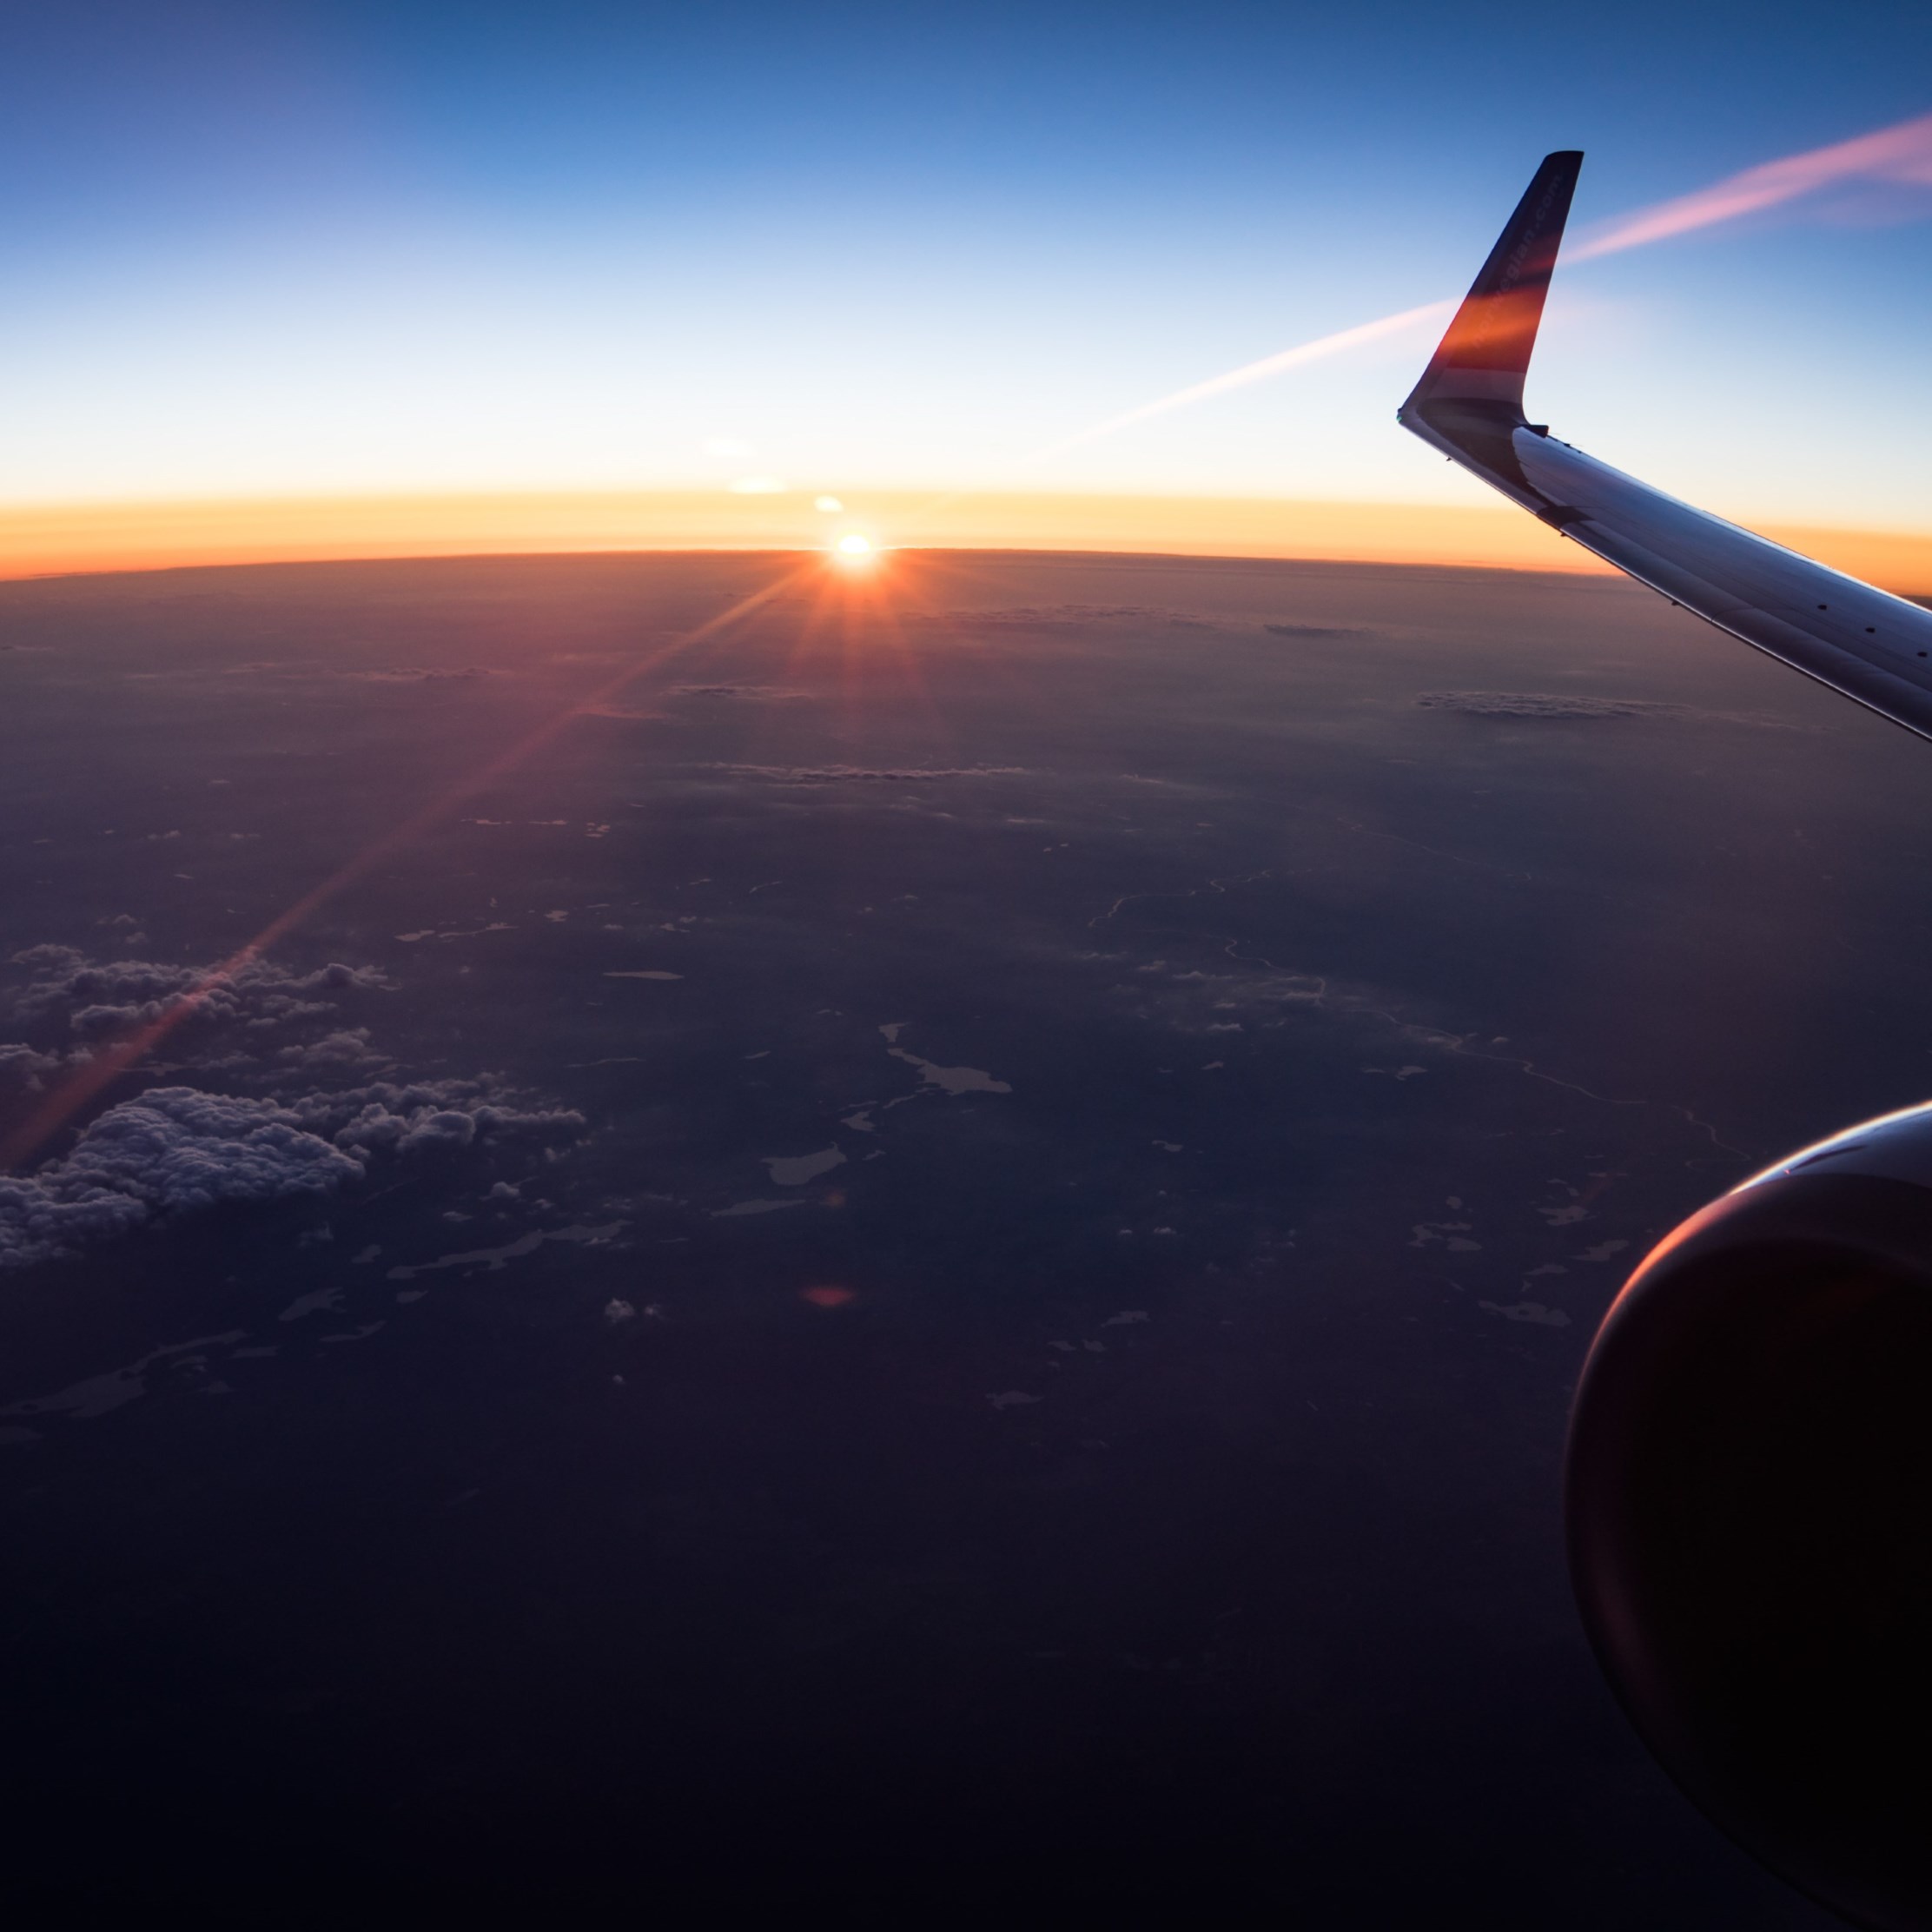 In the plane watching the sunset wallpaper 2224x2224